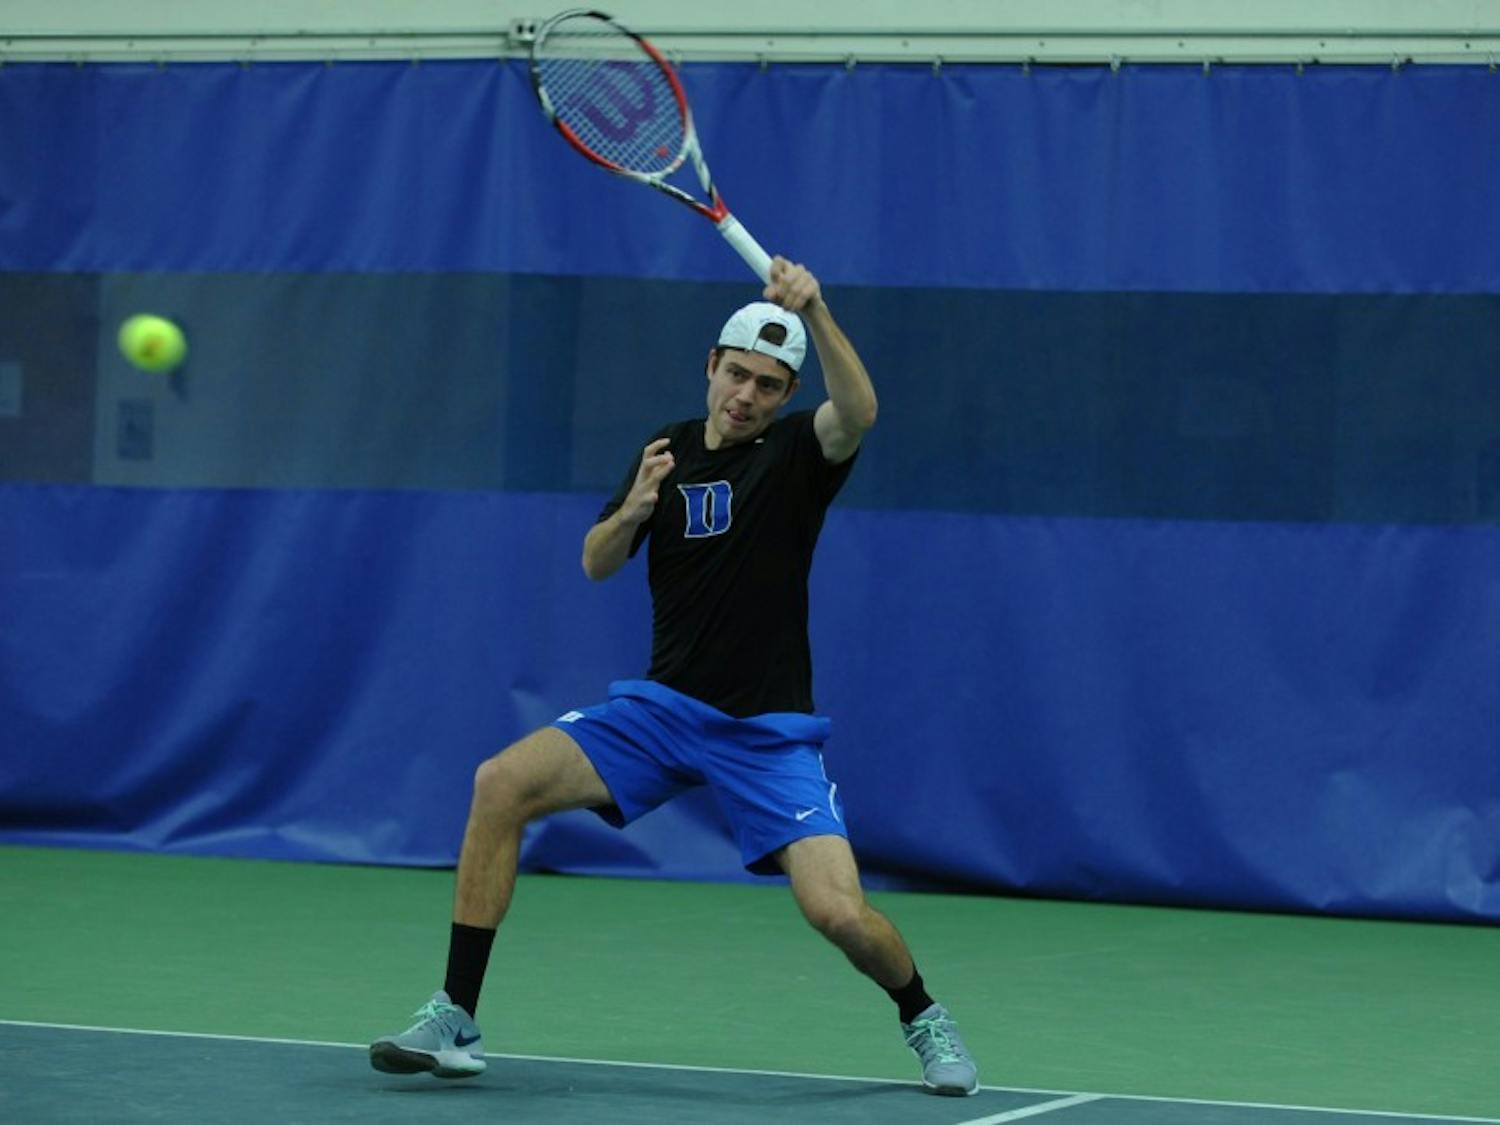 In the Blue Devils' last match, senior Raphael Hemmeler joined head coach Ramsey Smith as one of five players in program history to reach the 100-win plateau in both singles and doubles play.